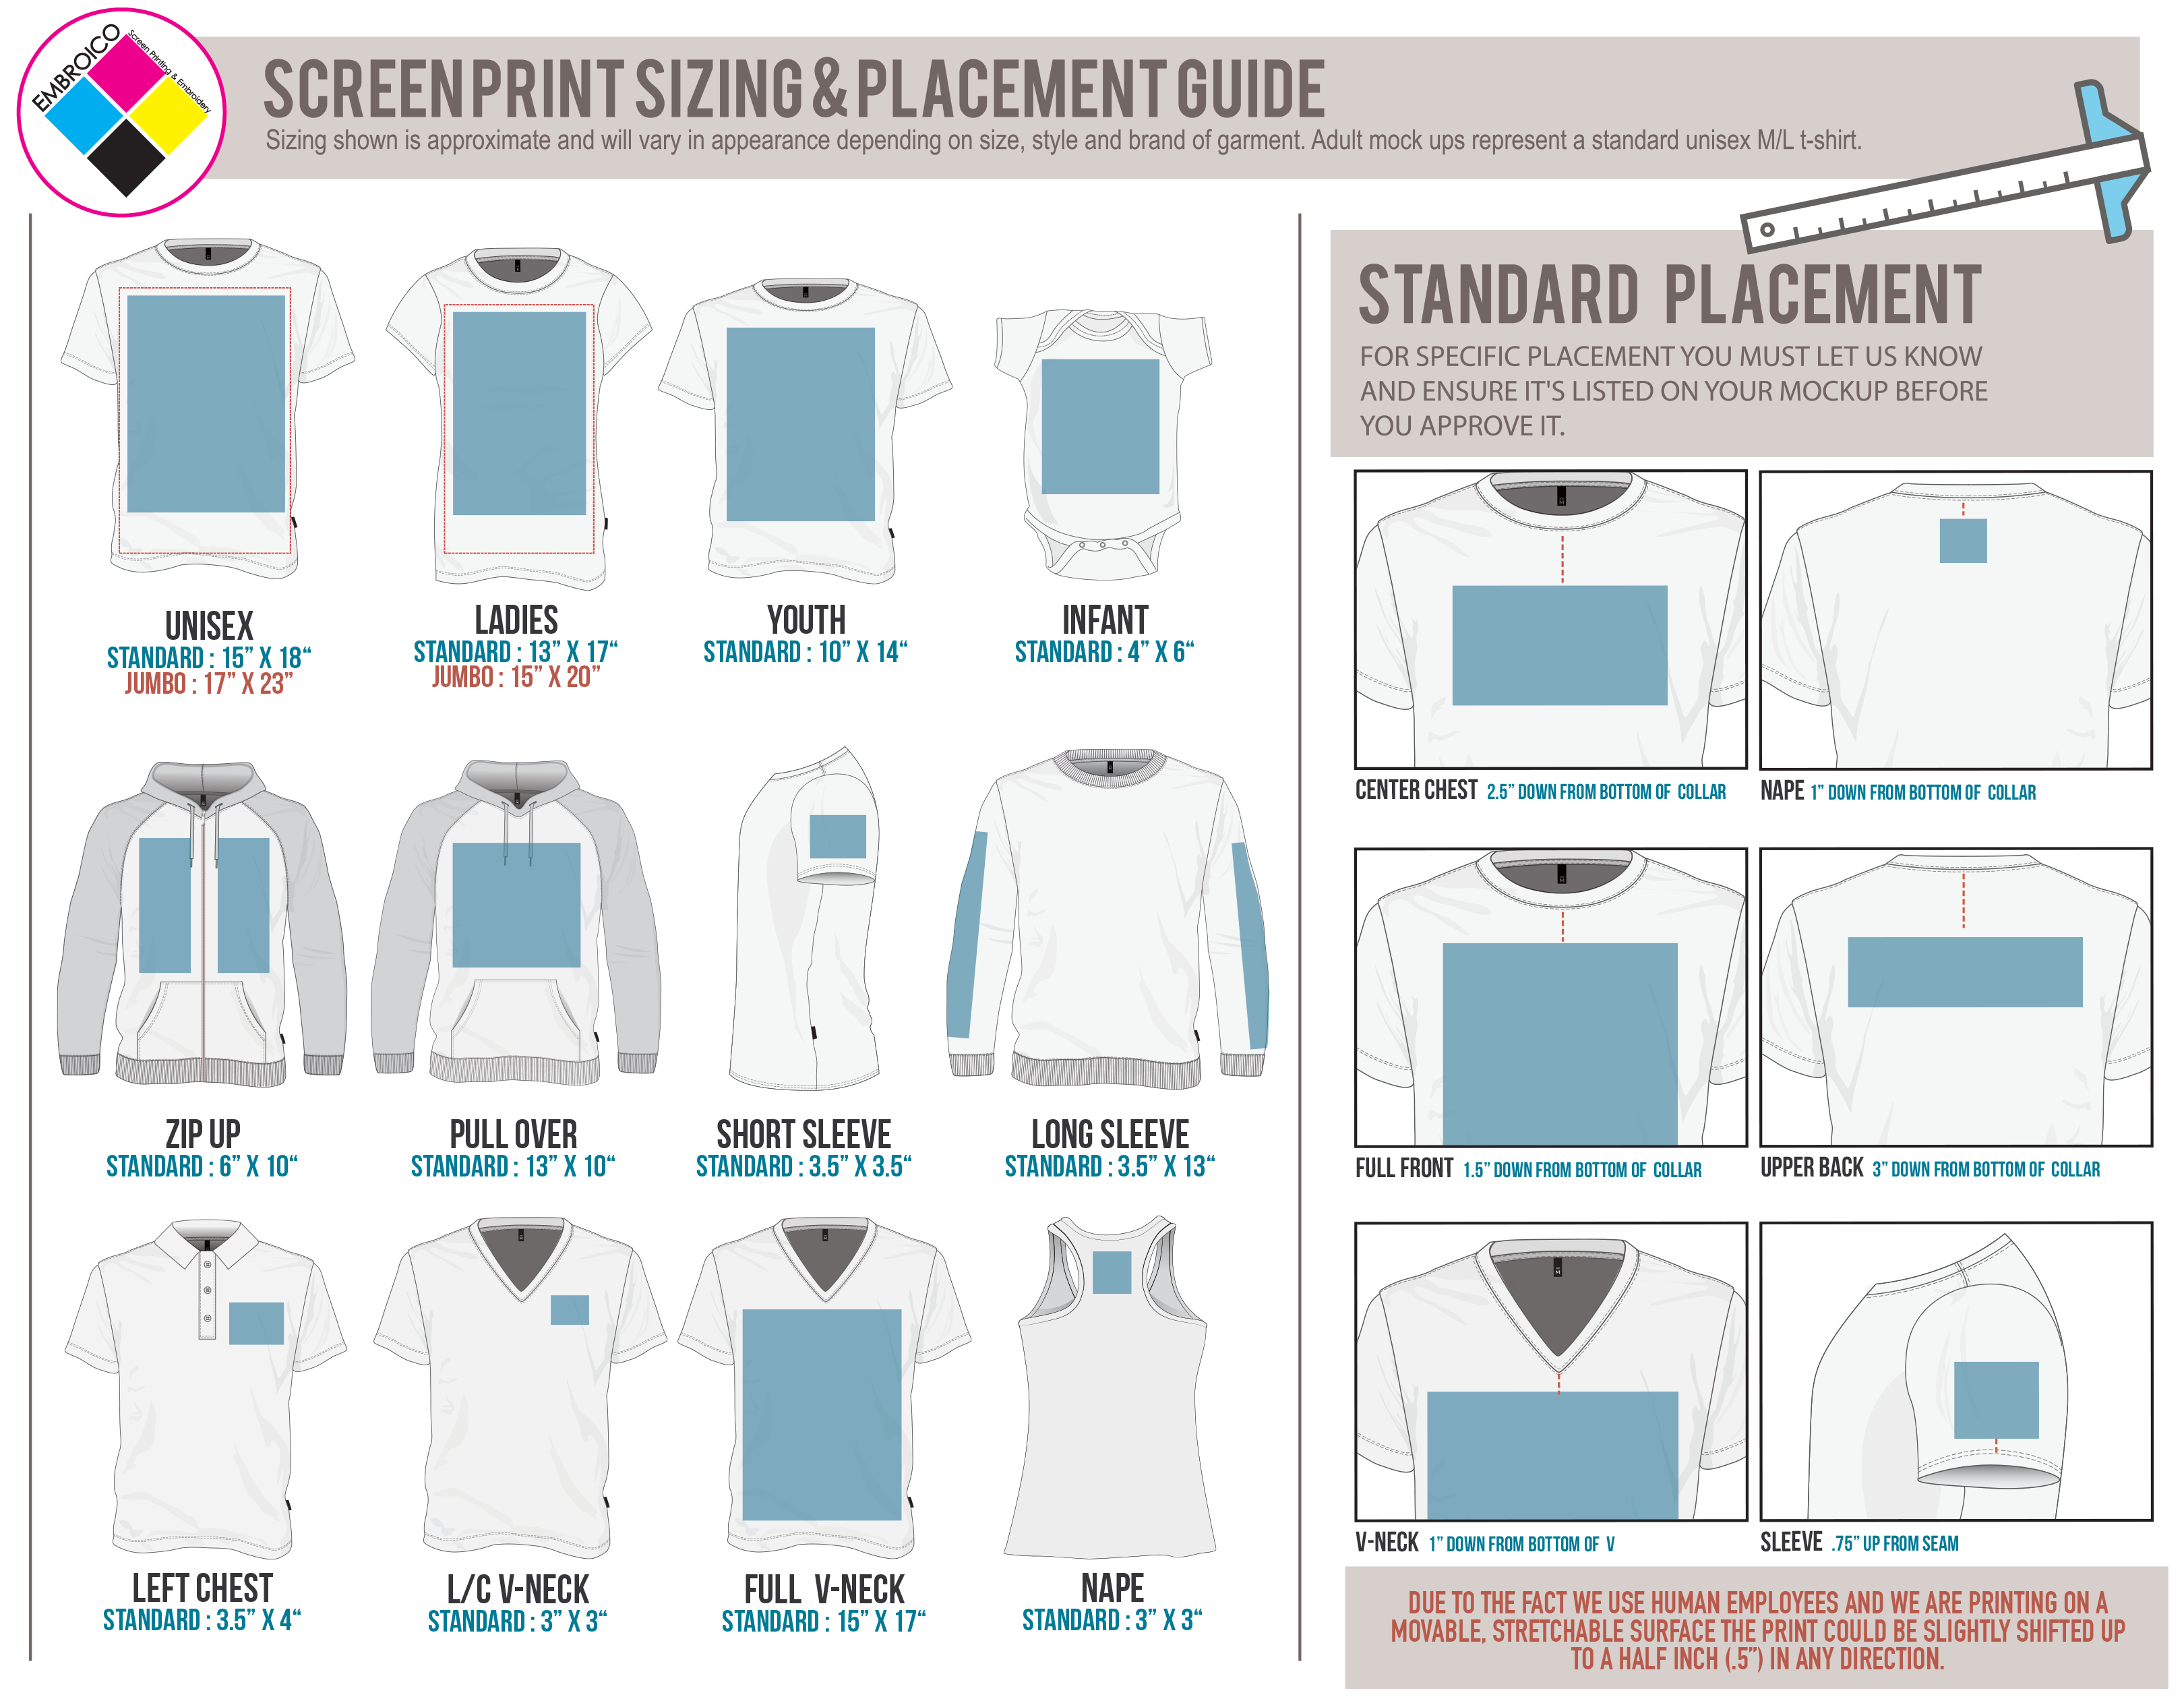 Guide Placement Chart